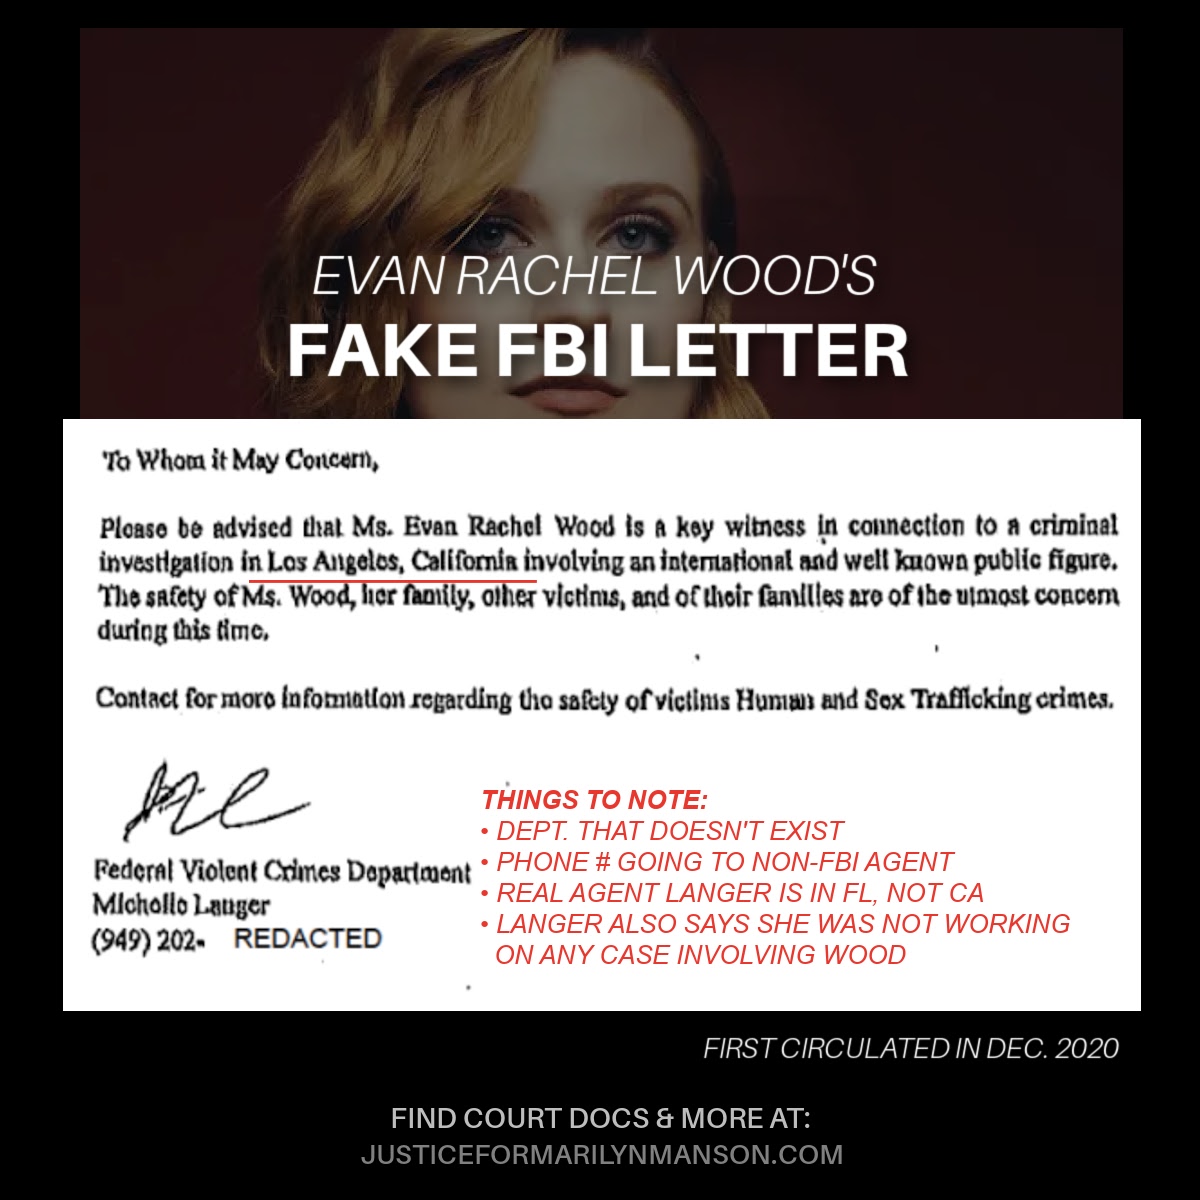 Court Documents I Ashley Illma Gore and Evan Rachel Wood forge FBI letter impersonating two real federal agents that Wood filed in court in two states